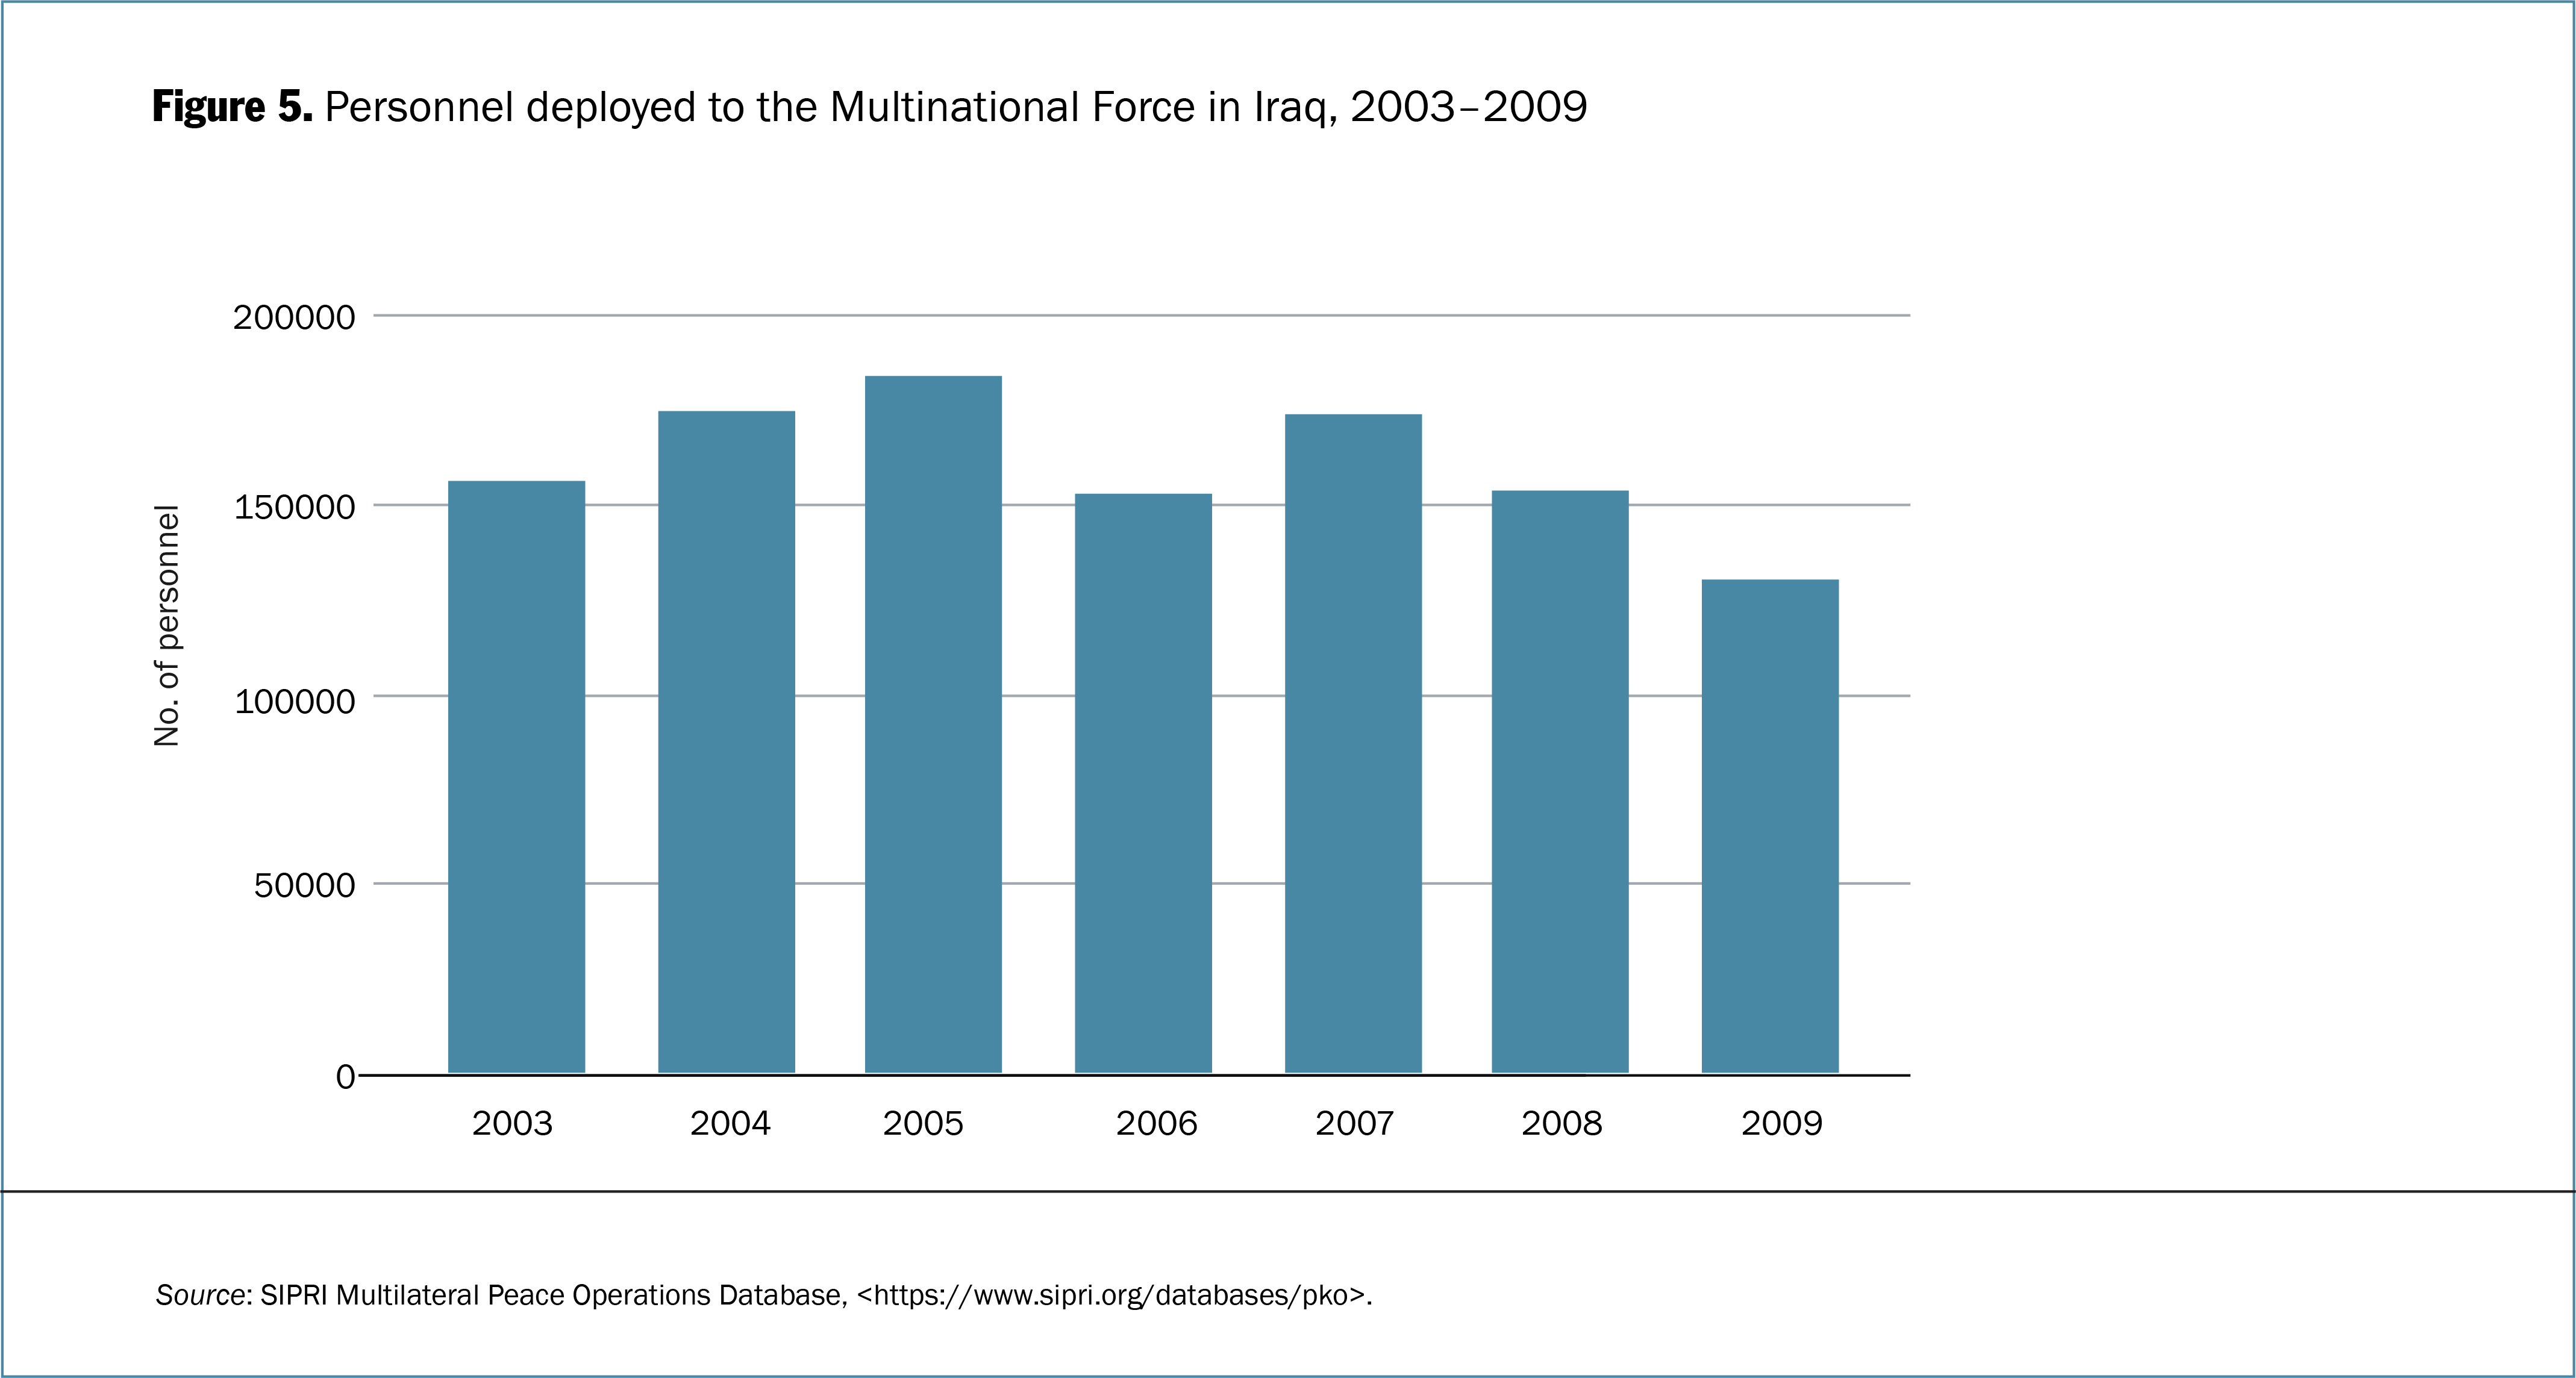 Personnel deployed to the Multinational Force in Iraq